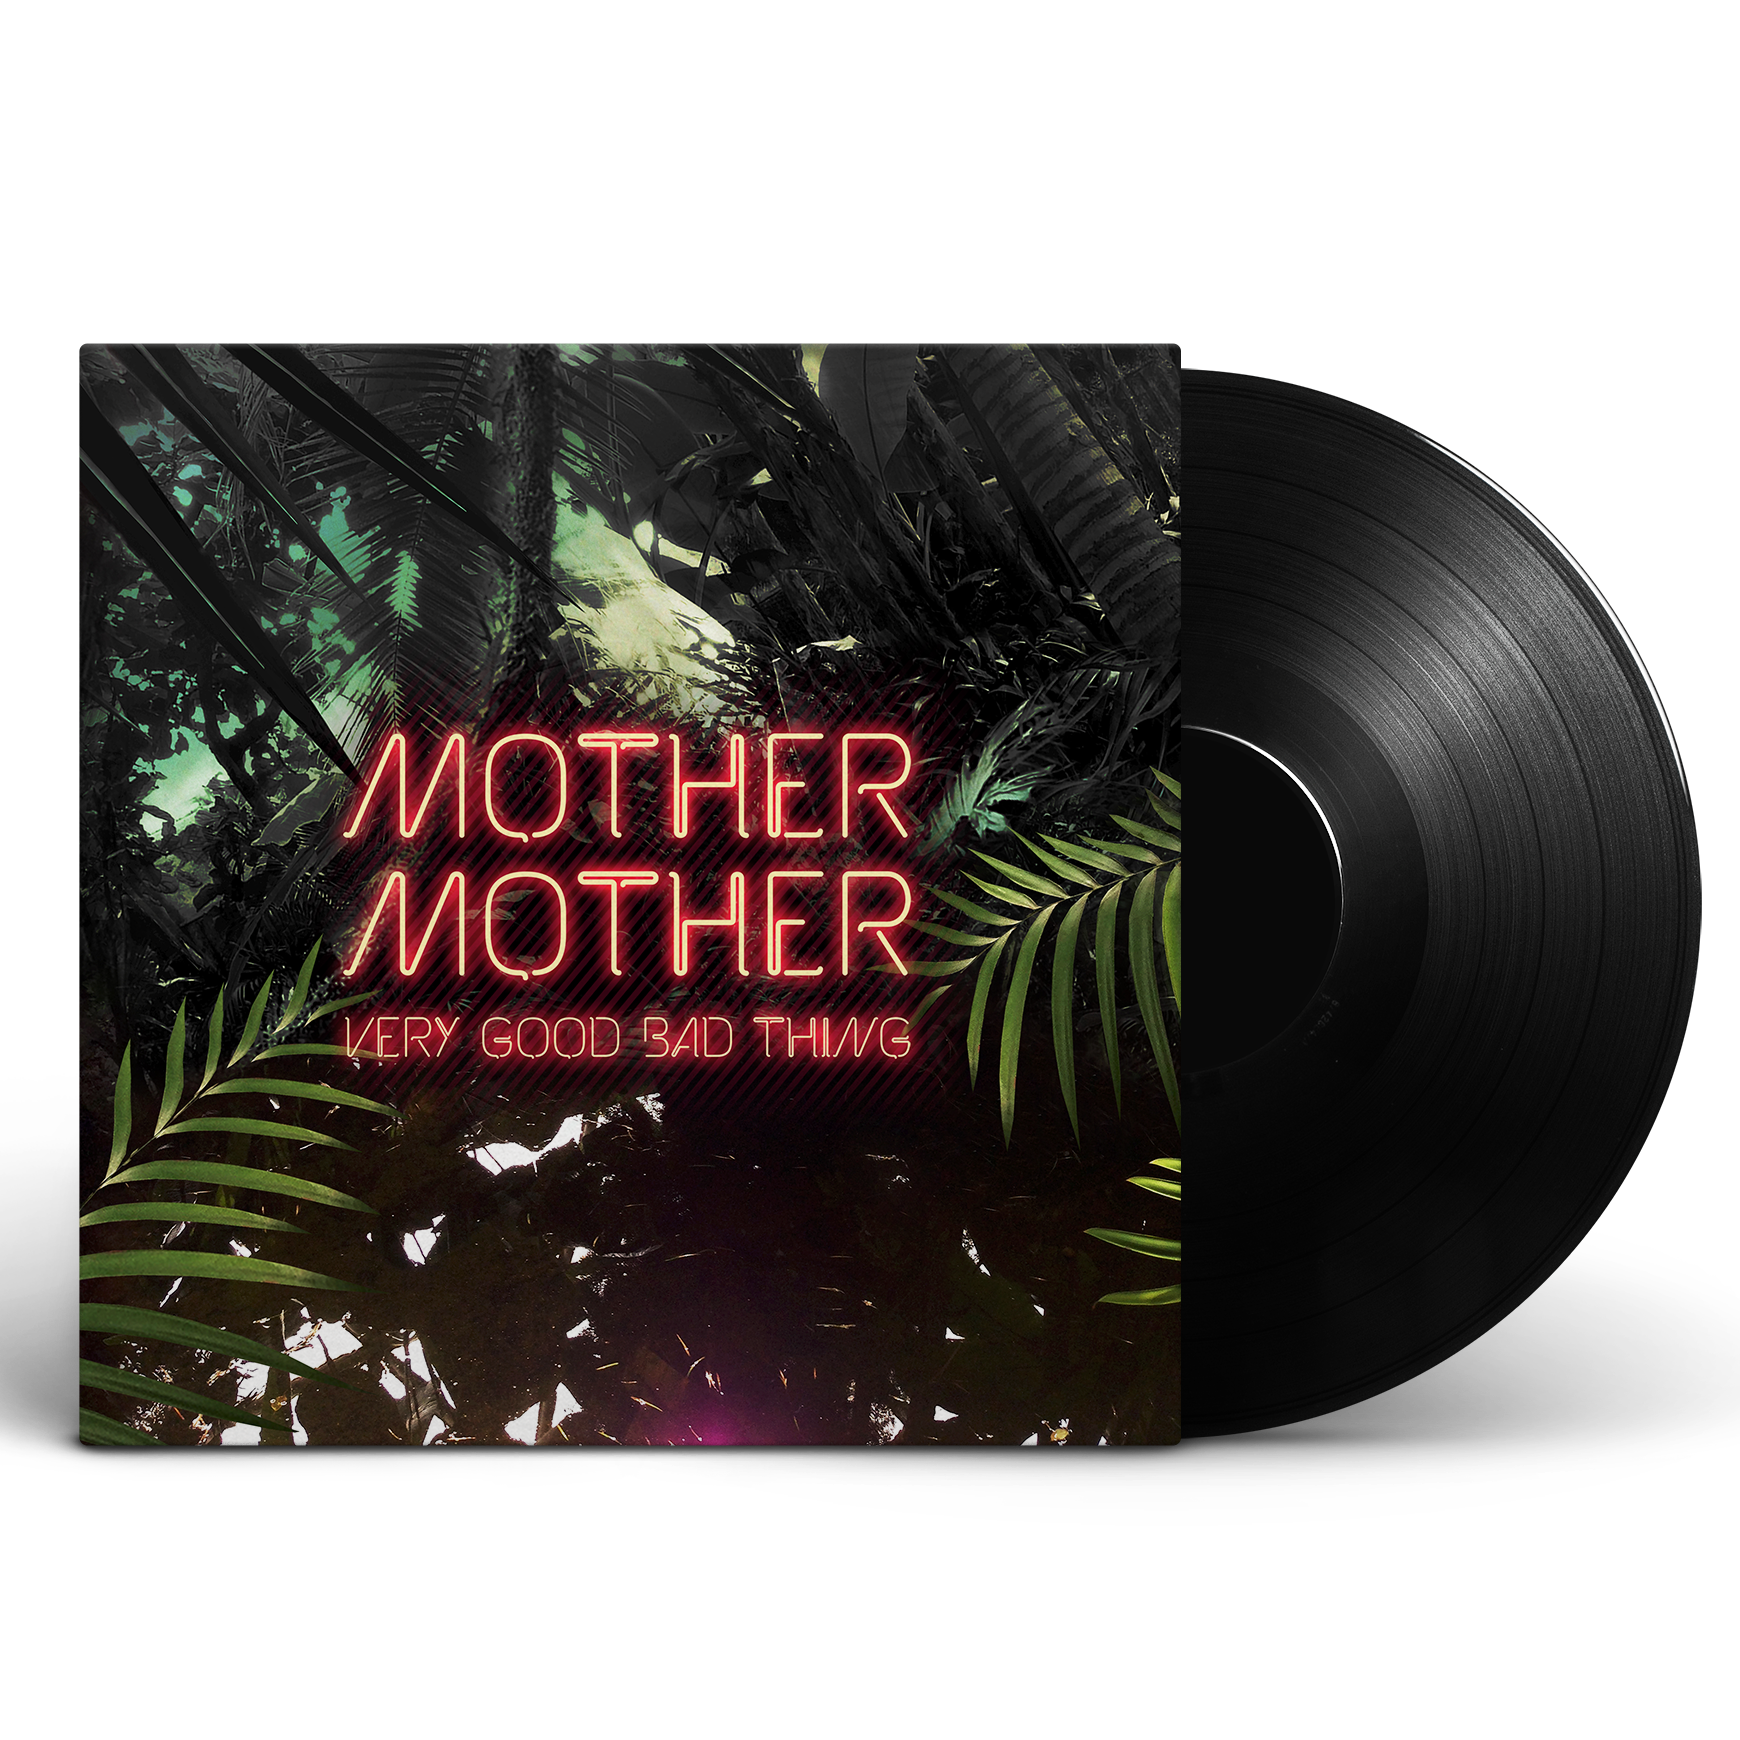 Mother Mother Very Good Bad Thing LP vinyl